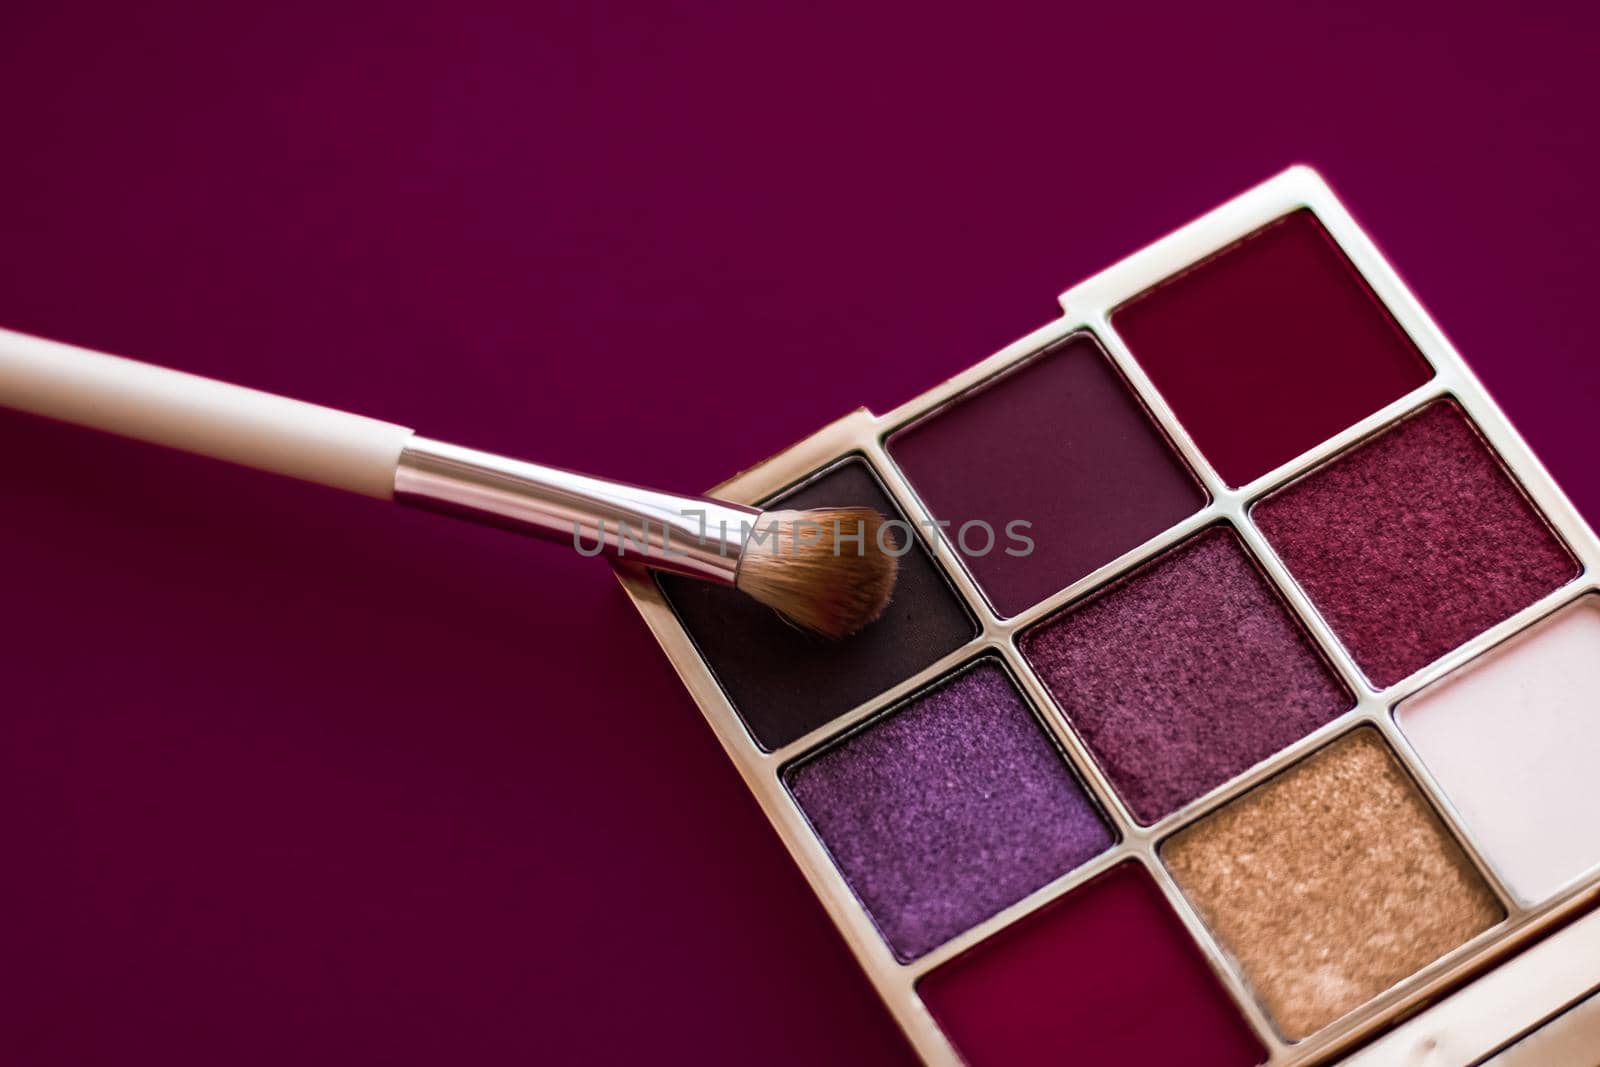 Eyeshadow palette and make-up brush on wine background, eye shadows cosmetics product for luxury beauty brand promotion and holiday fashion blog design by Anneleven